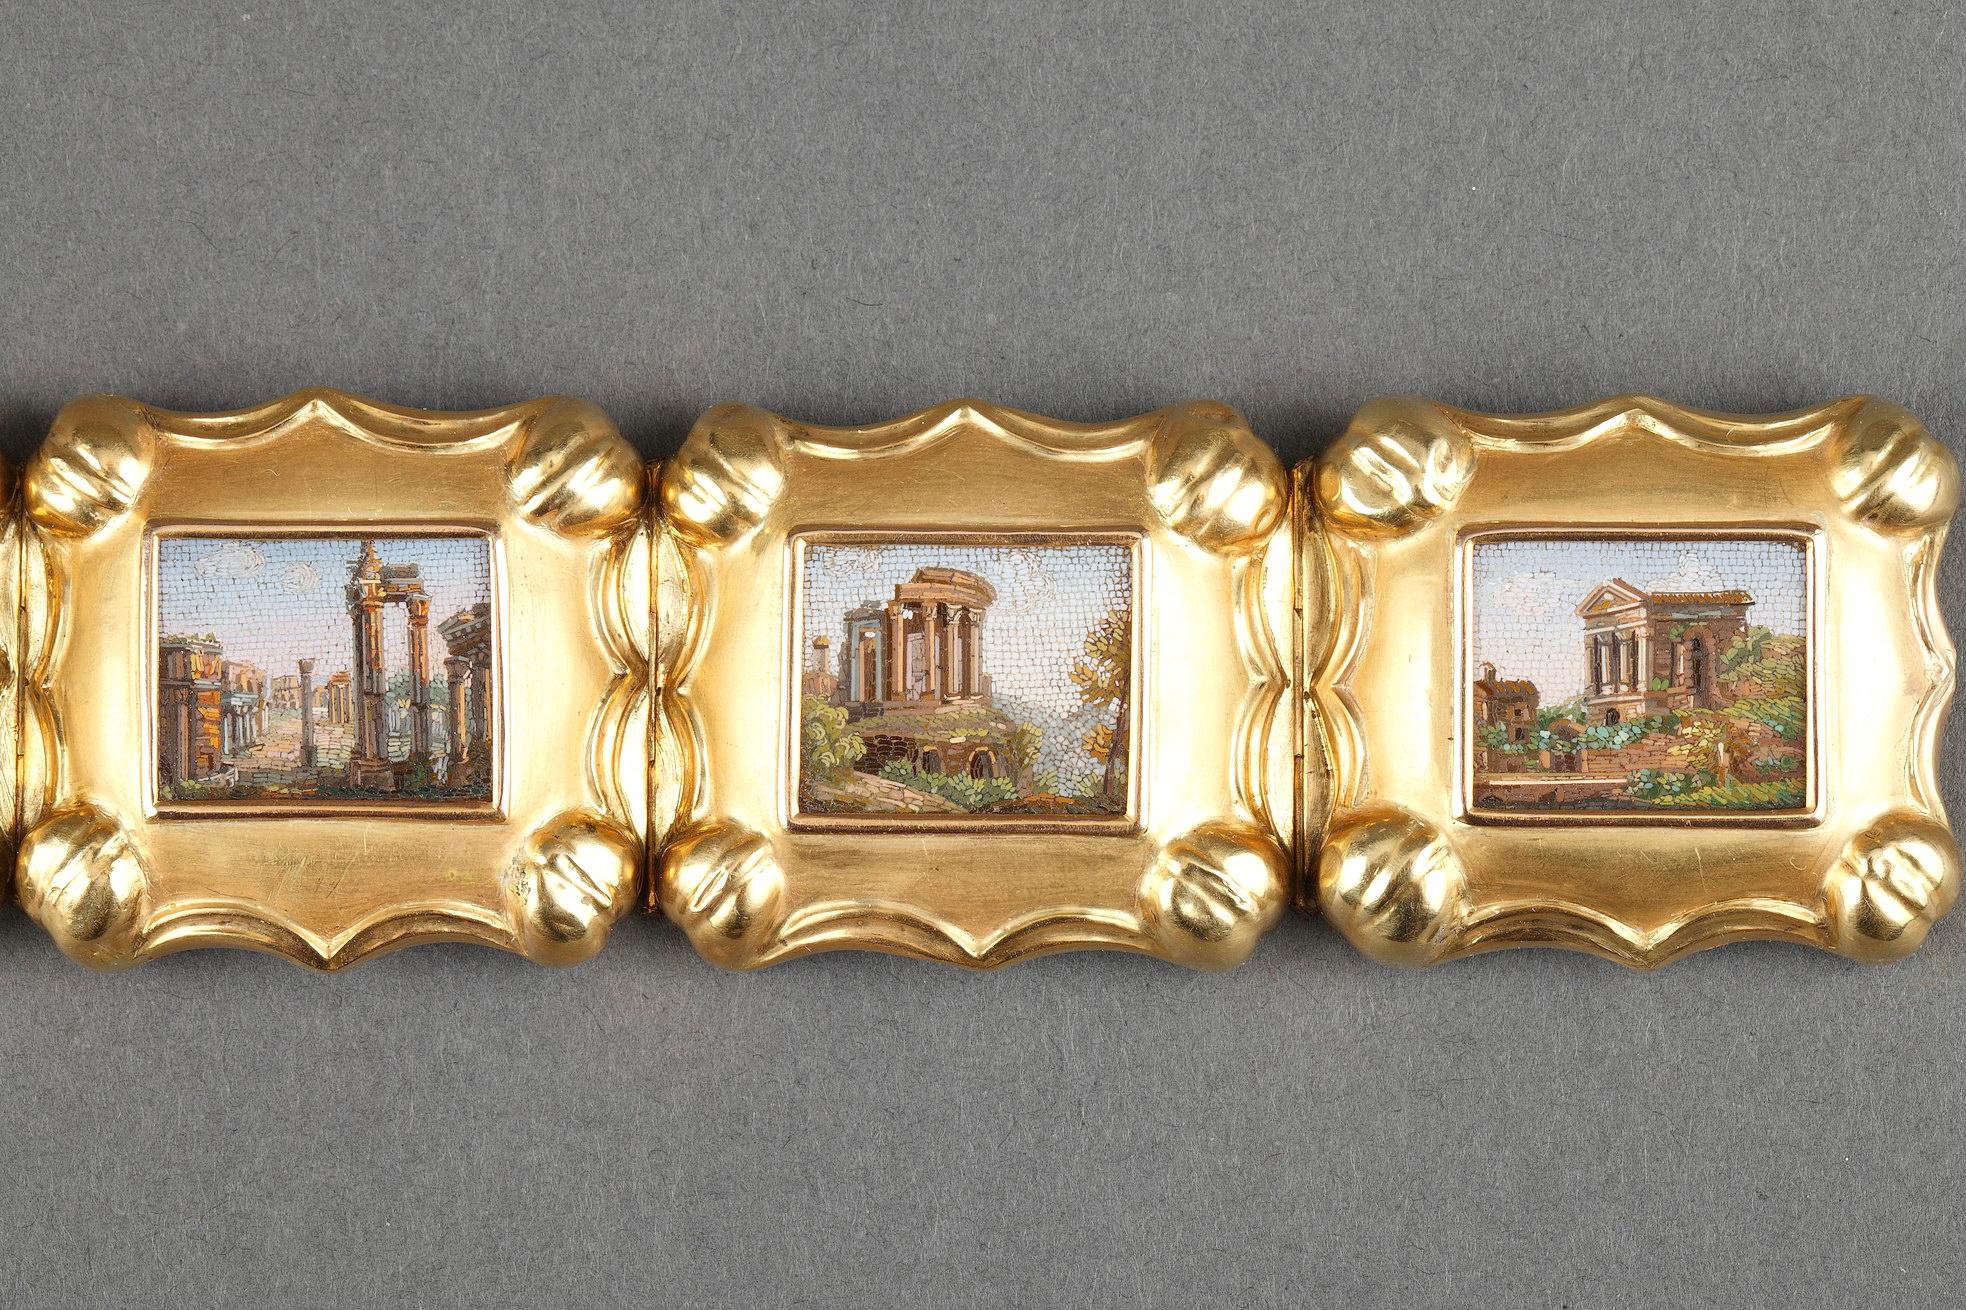 Gold and Micromosaic Bracelet, First Half of the 19th Century Work For Sale 2